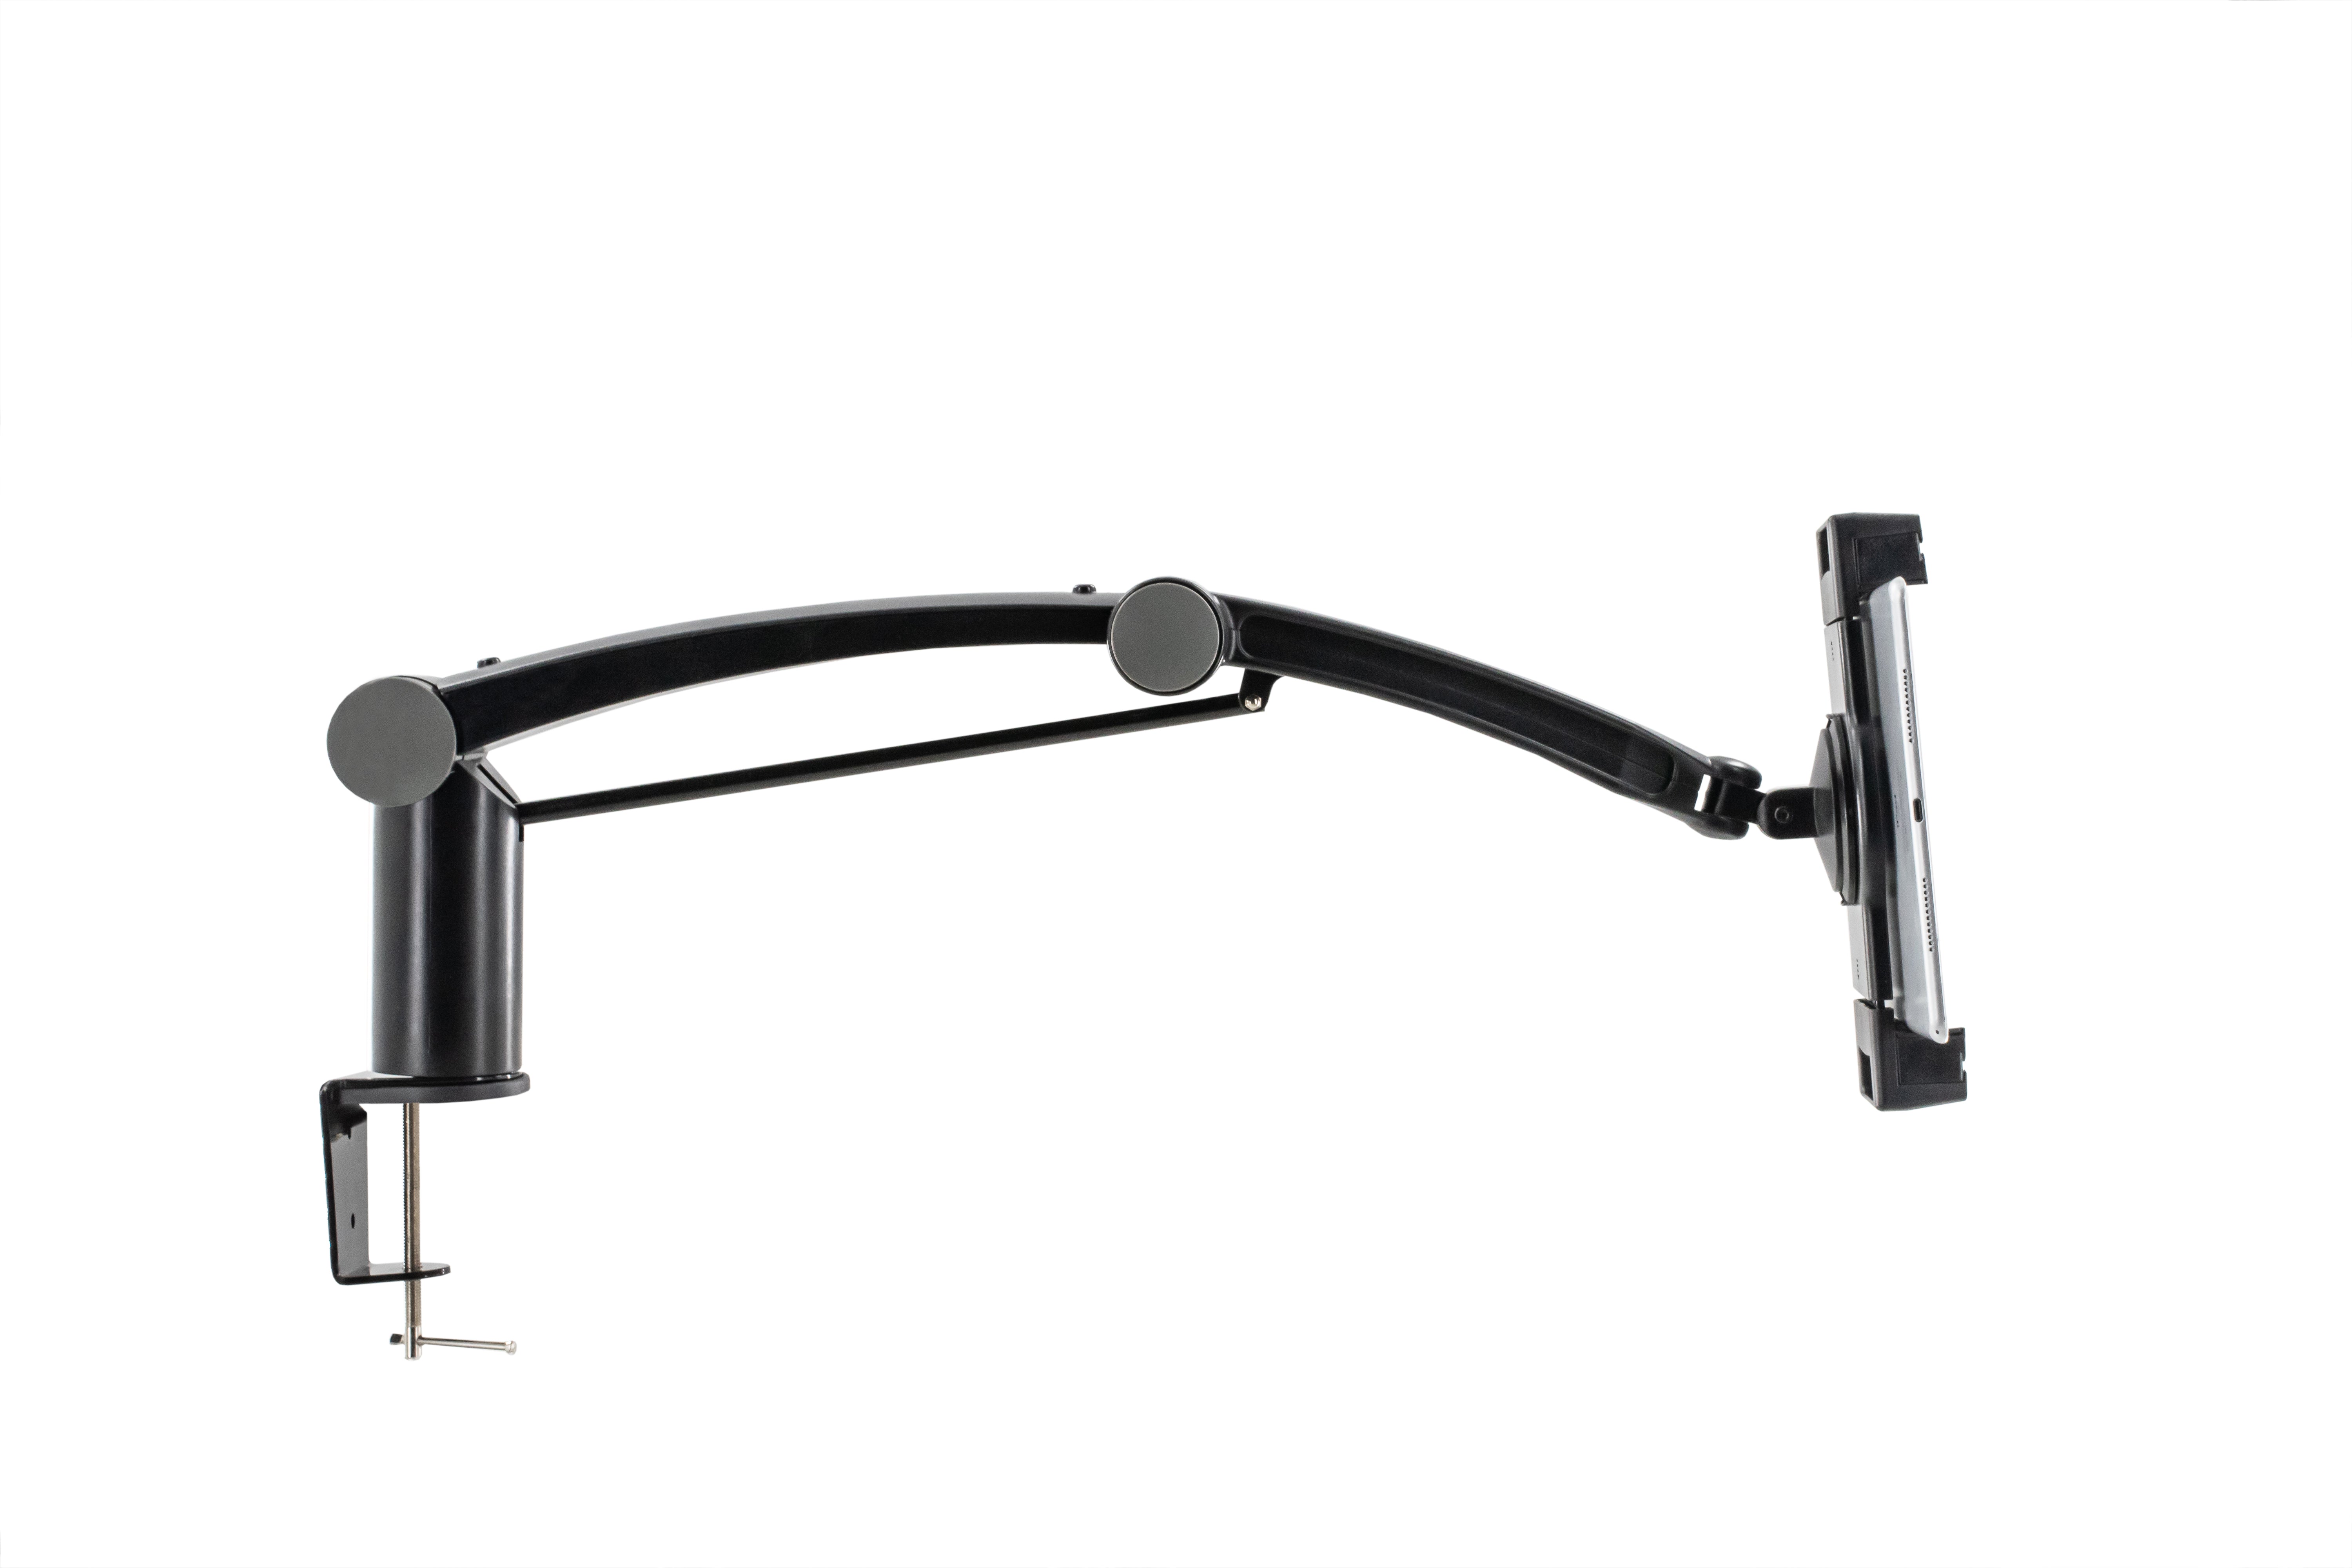 Universal Tablet Mounting Clamp for 7-13-inch tablets